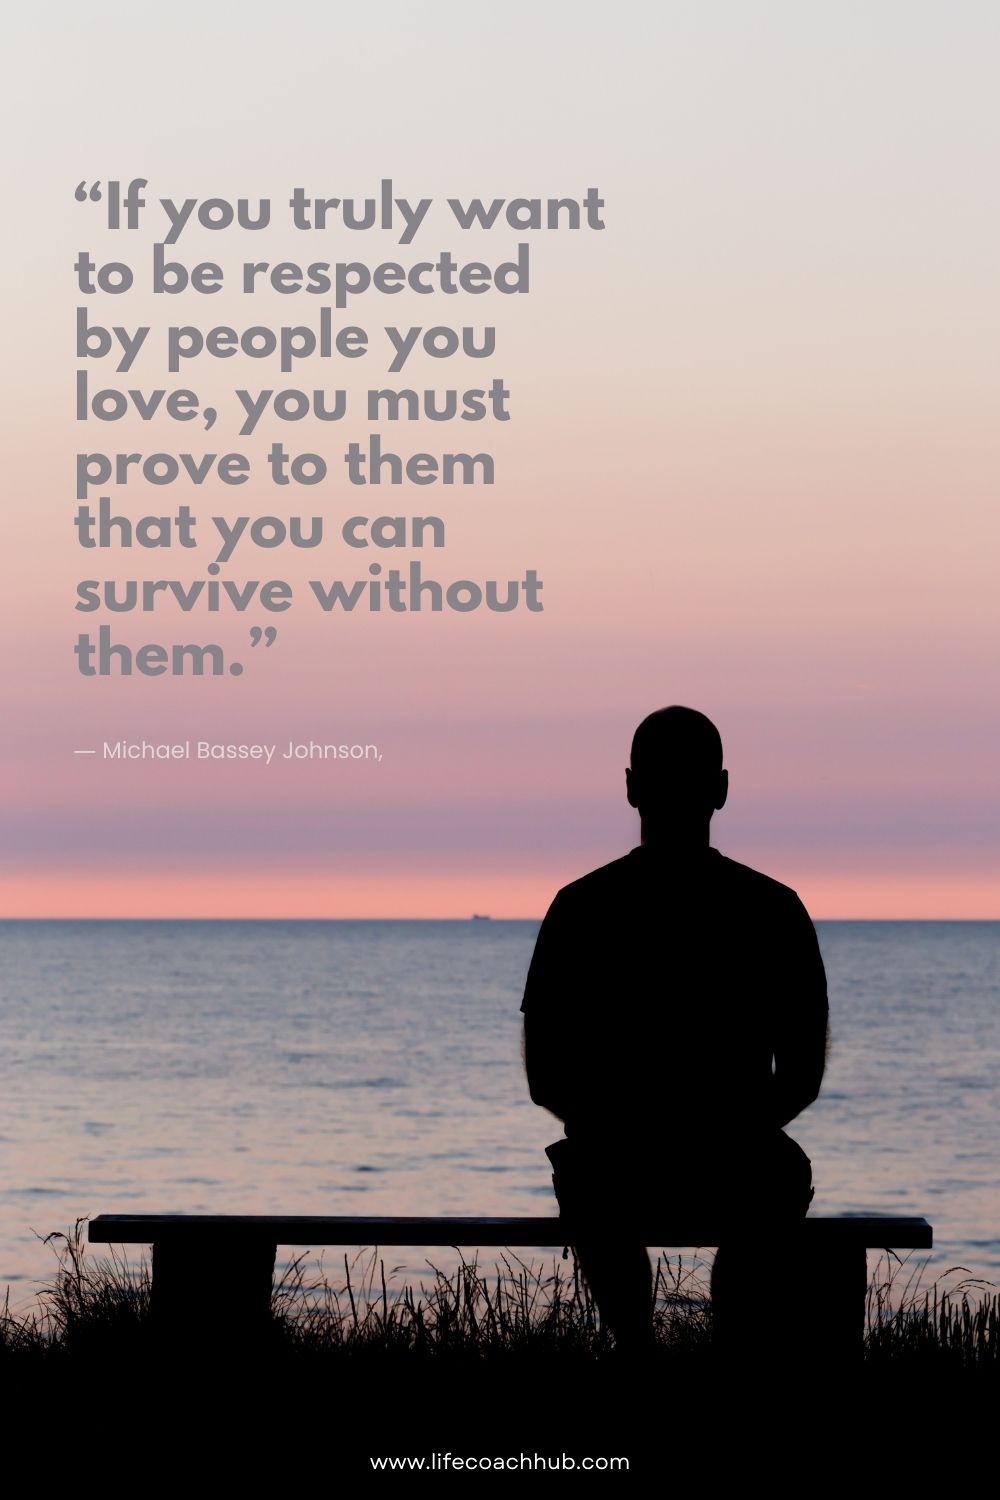 If you truly want to be respected by people you love you must prove to them that you can survive without them